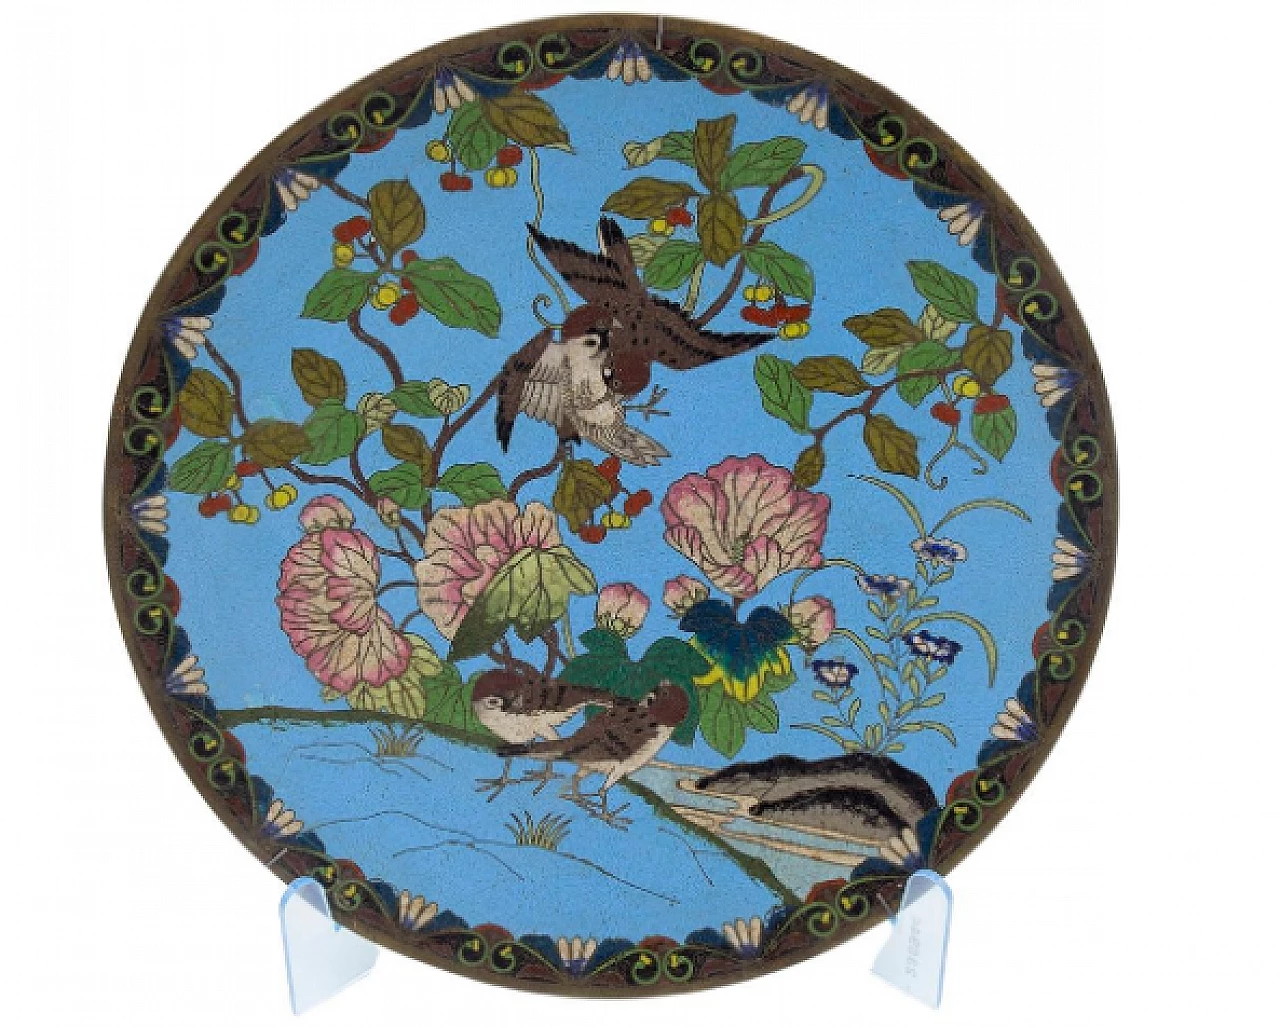 Chinese bronze and cloisonné enamel decorative plate 1